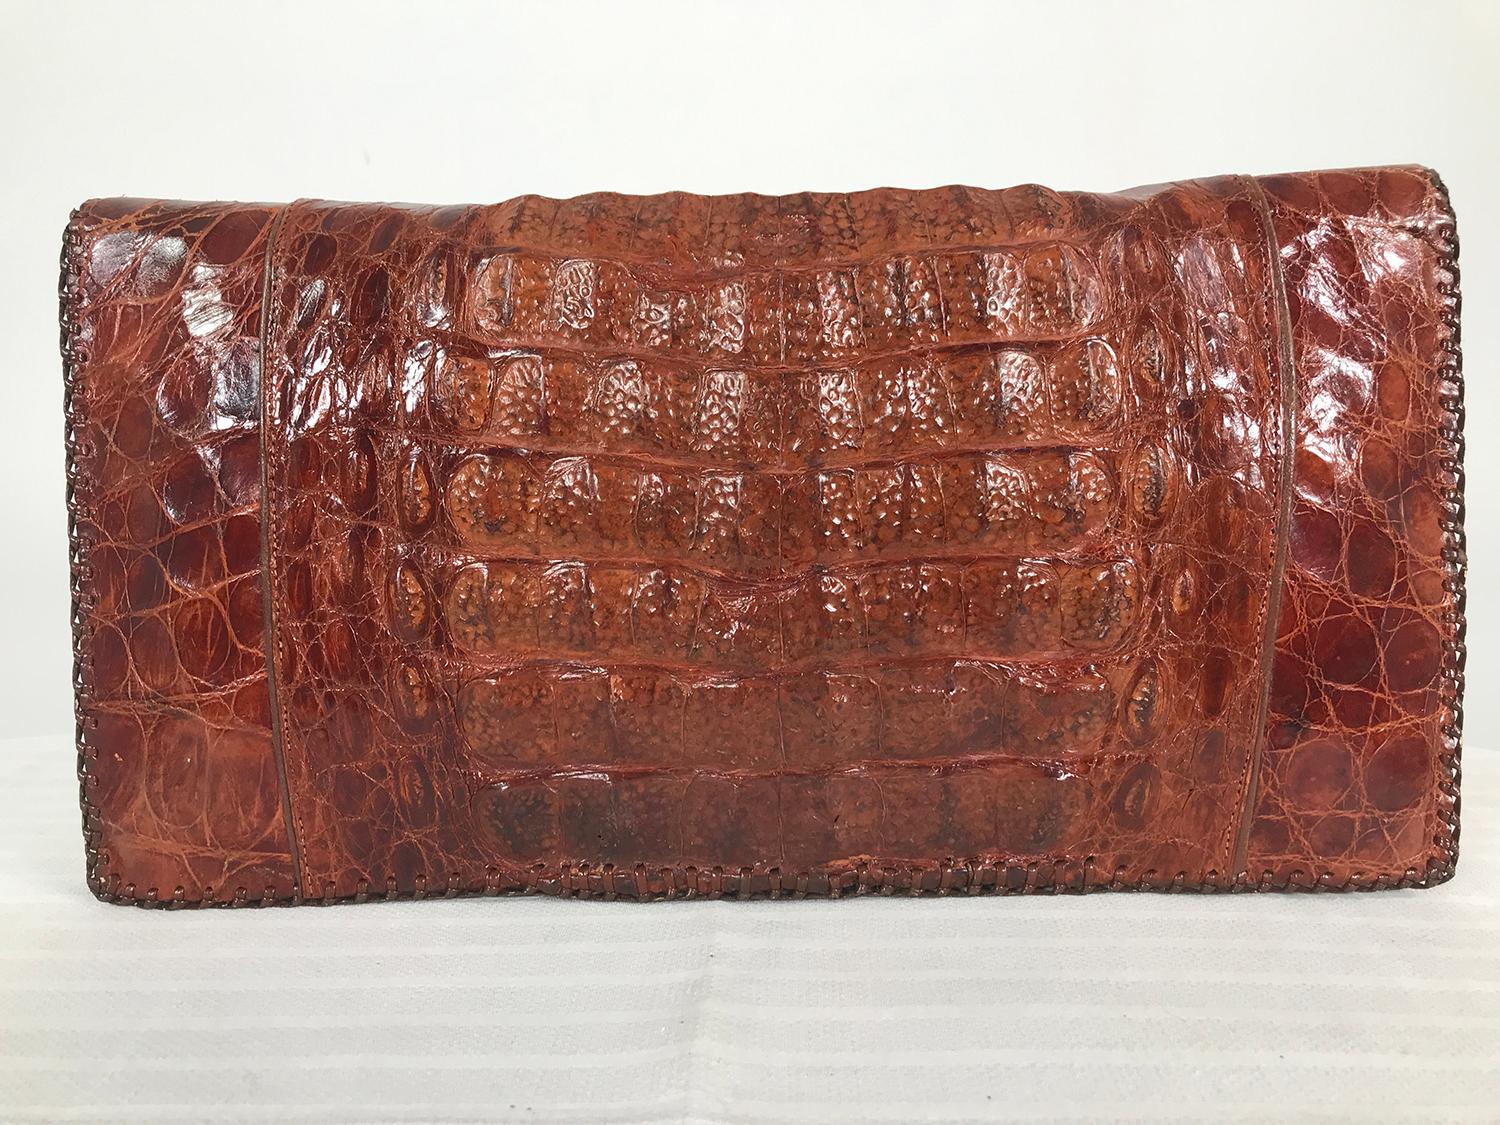 1950s large alligator clutch handbag. Unusually large alligator clutch handbag from the 1950s, in amber colour skin. The bag is long and folds in half, it is finished at the edges in a whip stitch, the interior is chocolate brown leather, there is a